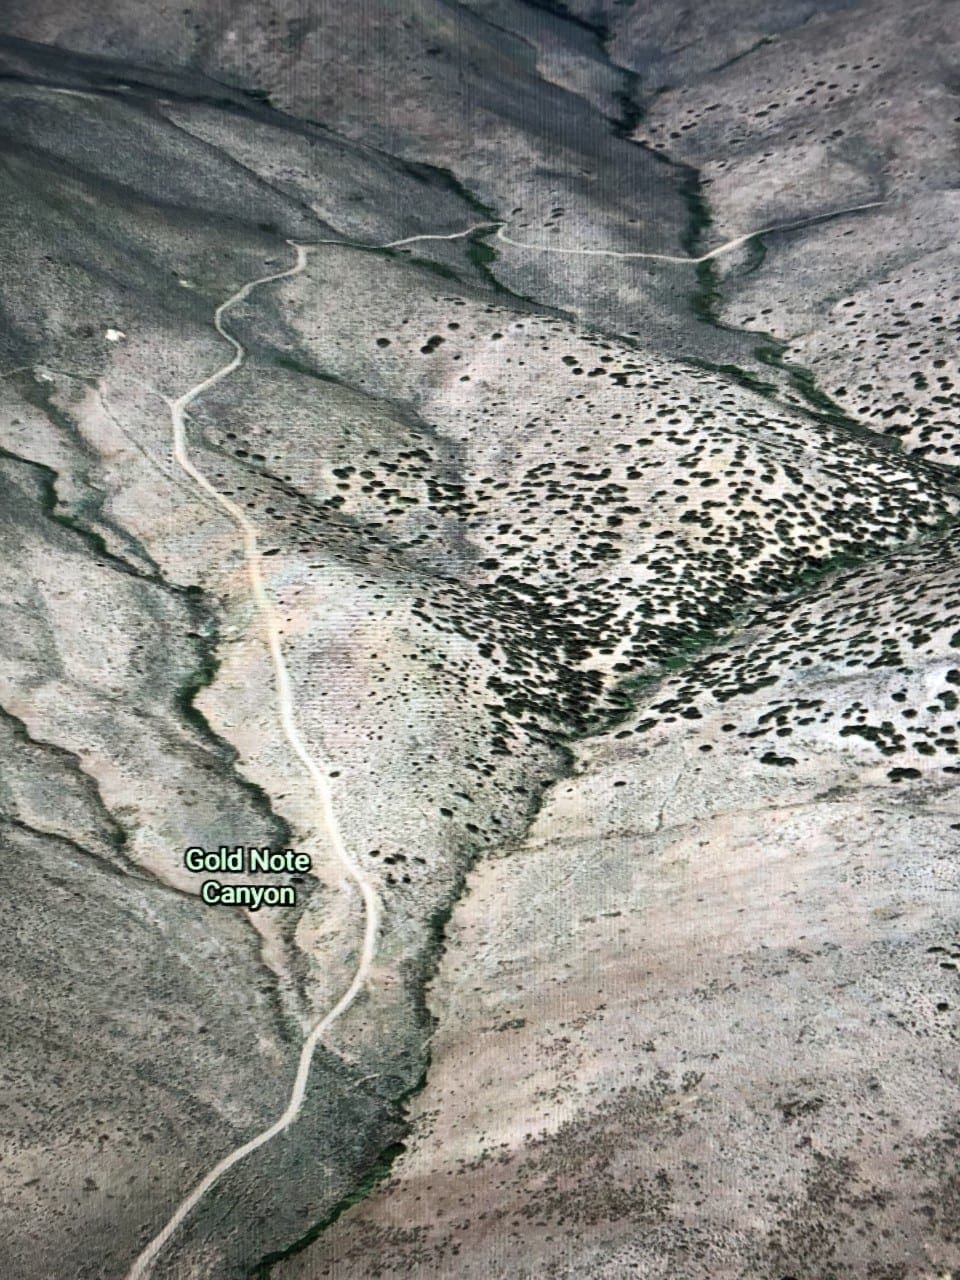 15.84 Acres in GOLD NOTE CANYON, HIDDEN TREASURE #1, SUR 2097 – A PATENTED MINING CLAIM -PAST PRODUCER OF GOLD, SILVER & ZINC photo 13